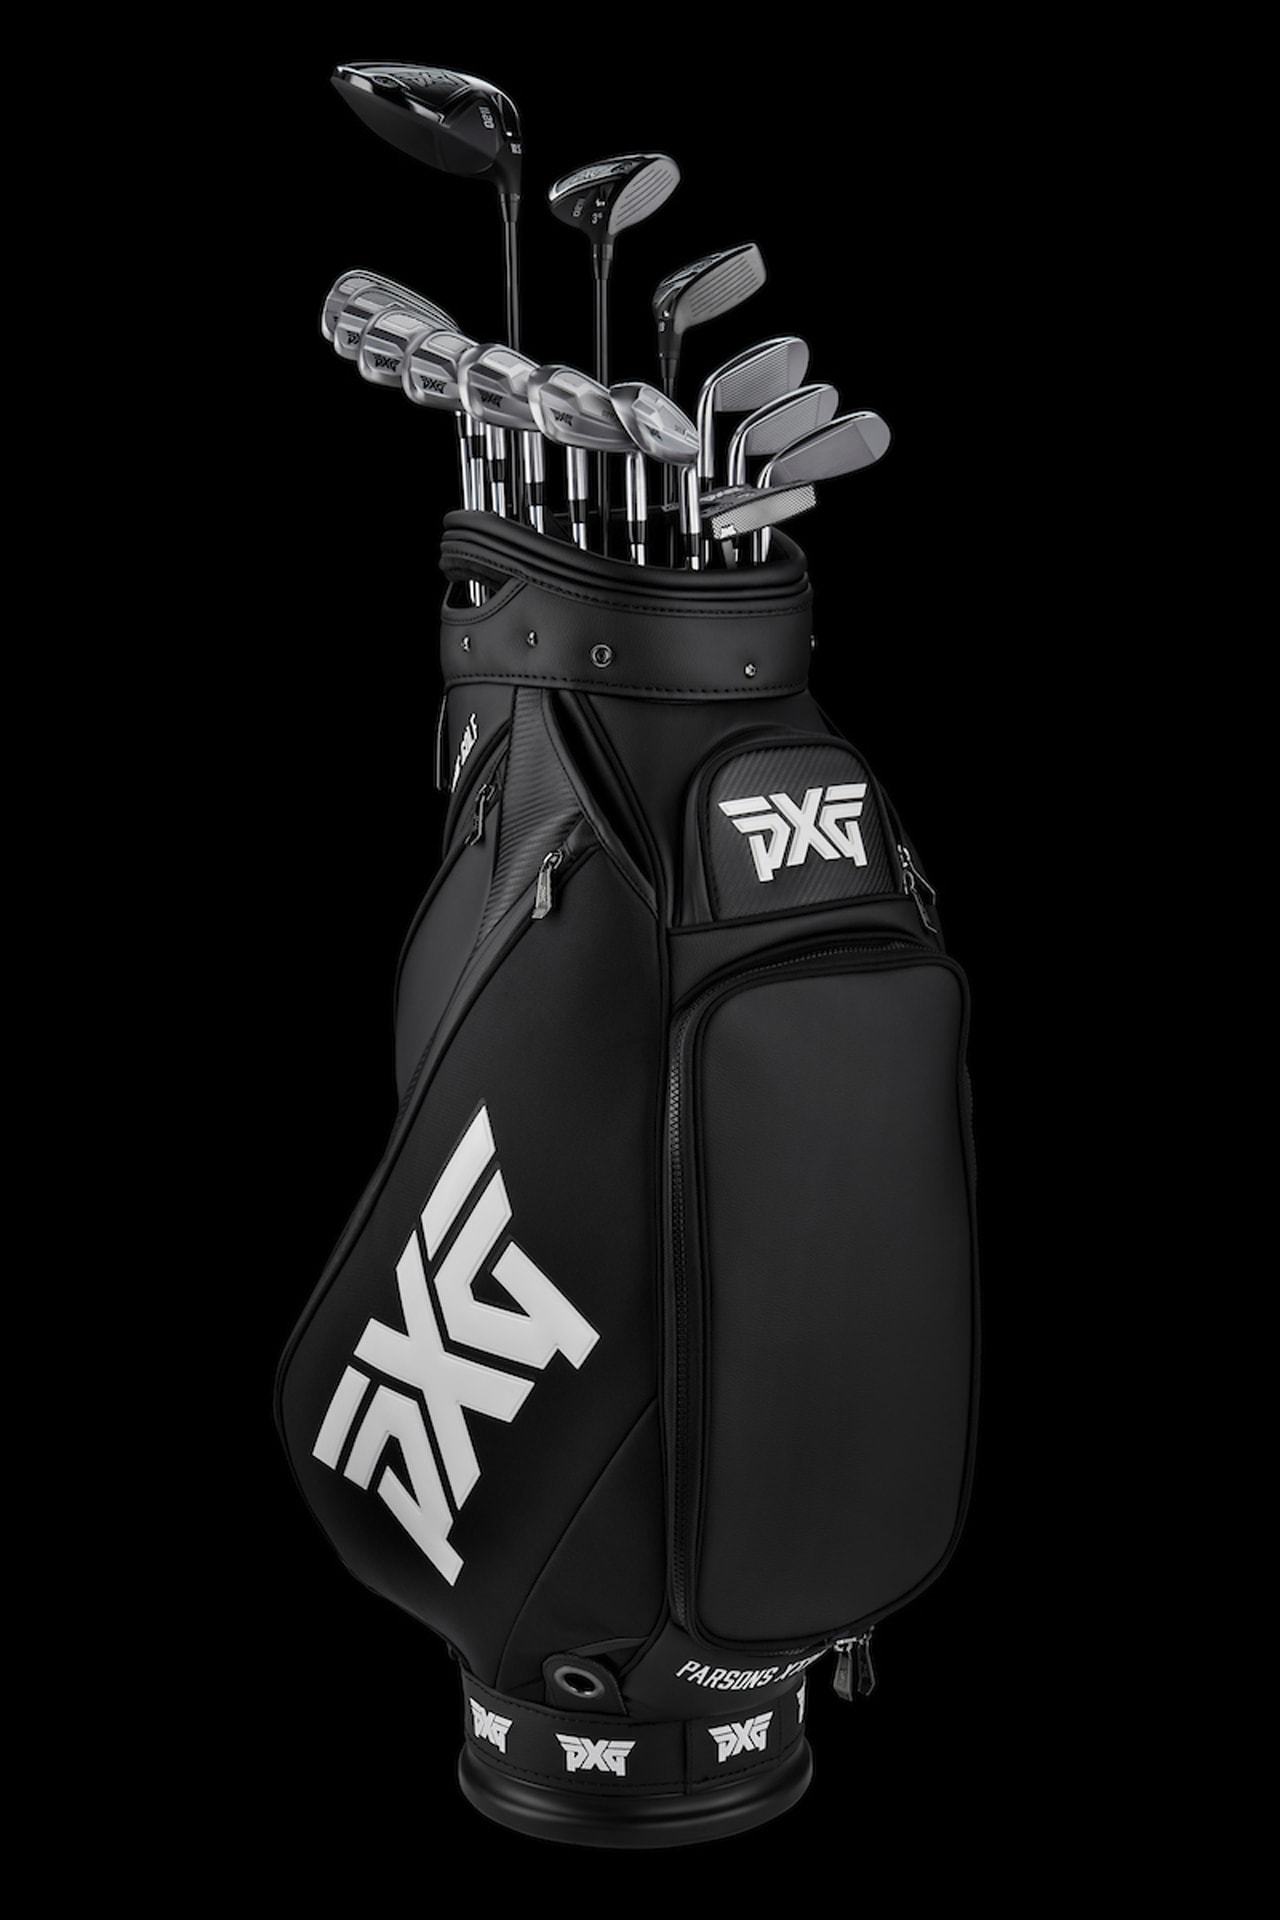 PXG fashion golf clubs sports influencers TopGolf 0211 Fairway Woods and Hybrids Drivers Iron Clubs Founder CEO Bob Parsons Mike Nicolette Brad Schweiger Renee Parsons versatility personalized fitting advanced DualCOR System, Honeycomb TPE inserts, ultra-thin clubface, and adjustable weighting high-performance drivers, fairway woods, hybrids, irons, wedges and putters experiential luxury experience PGA tour stainless steel progressive offset Ti811 body and a Ti412 face material MOI consistency AM355 round face design